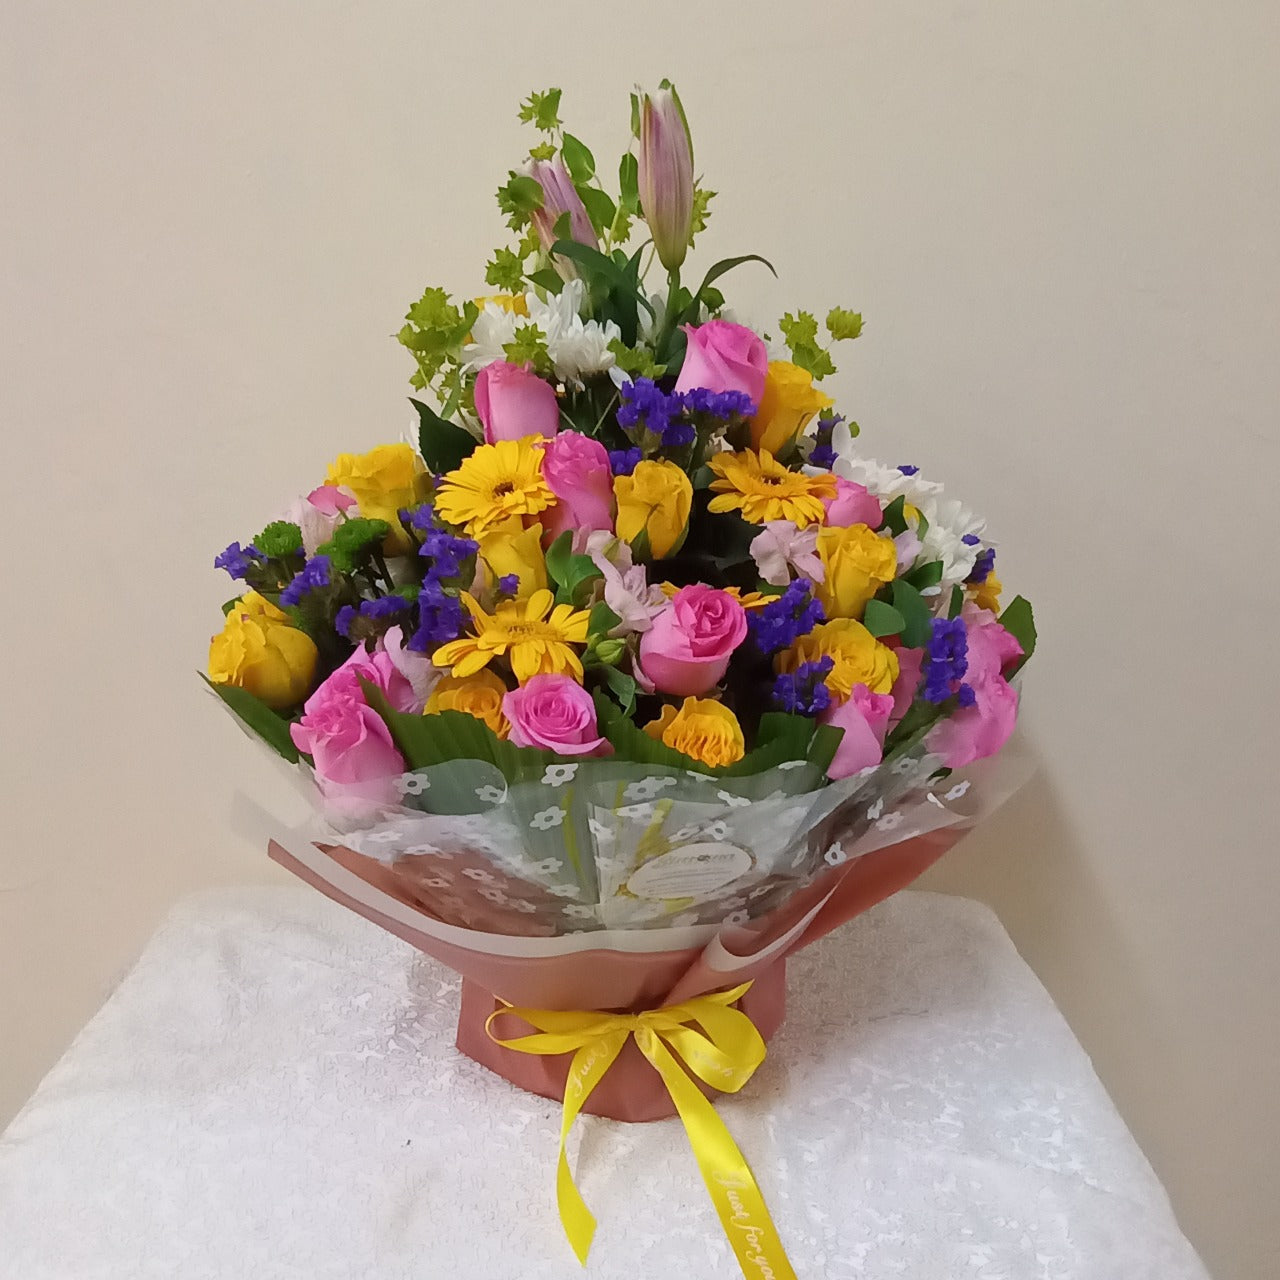 Simona Flowers - This bouquet is nice when wishing someone congrats on any success that they may have accomplished. The bouquet is well arranged with fresh roses and mums and complimented with other flower fillers to make all the colors pop!